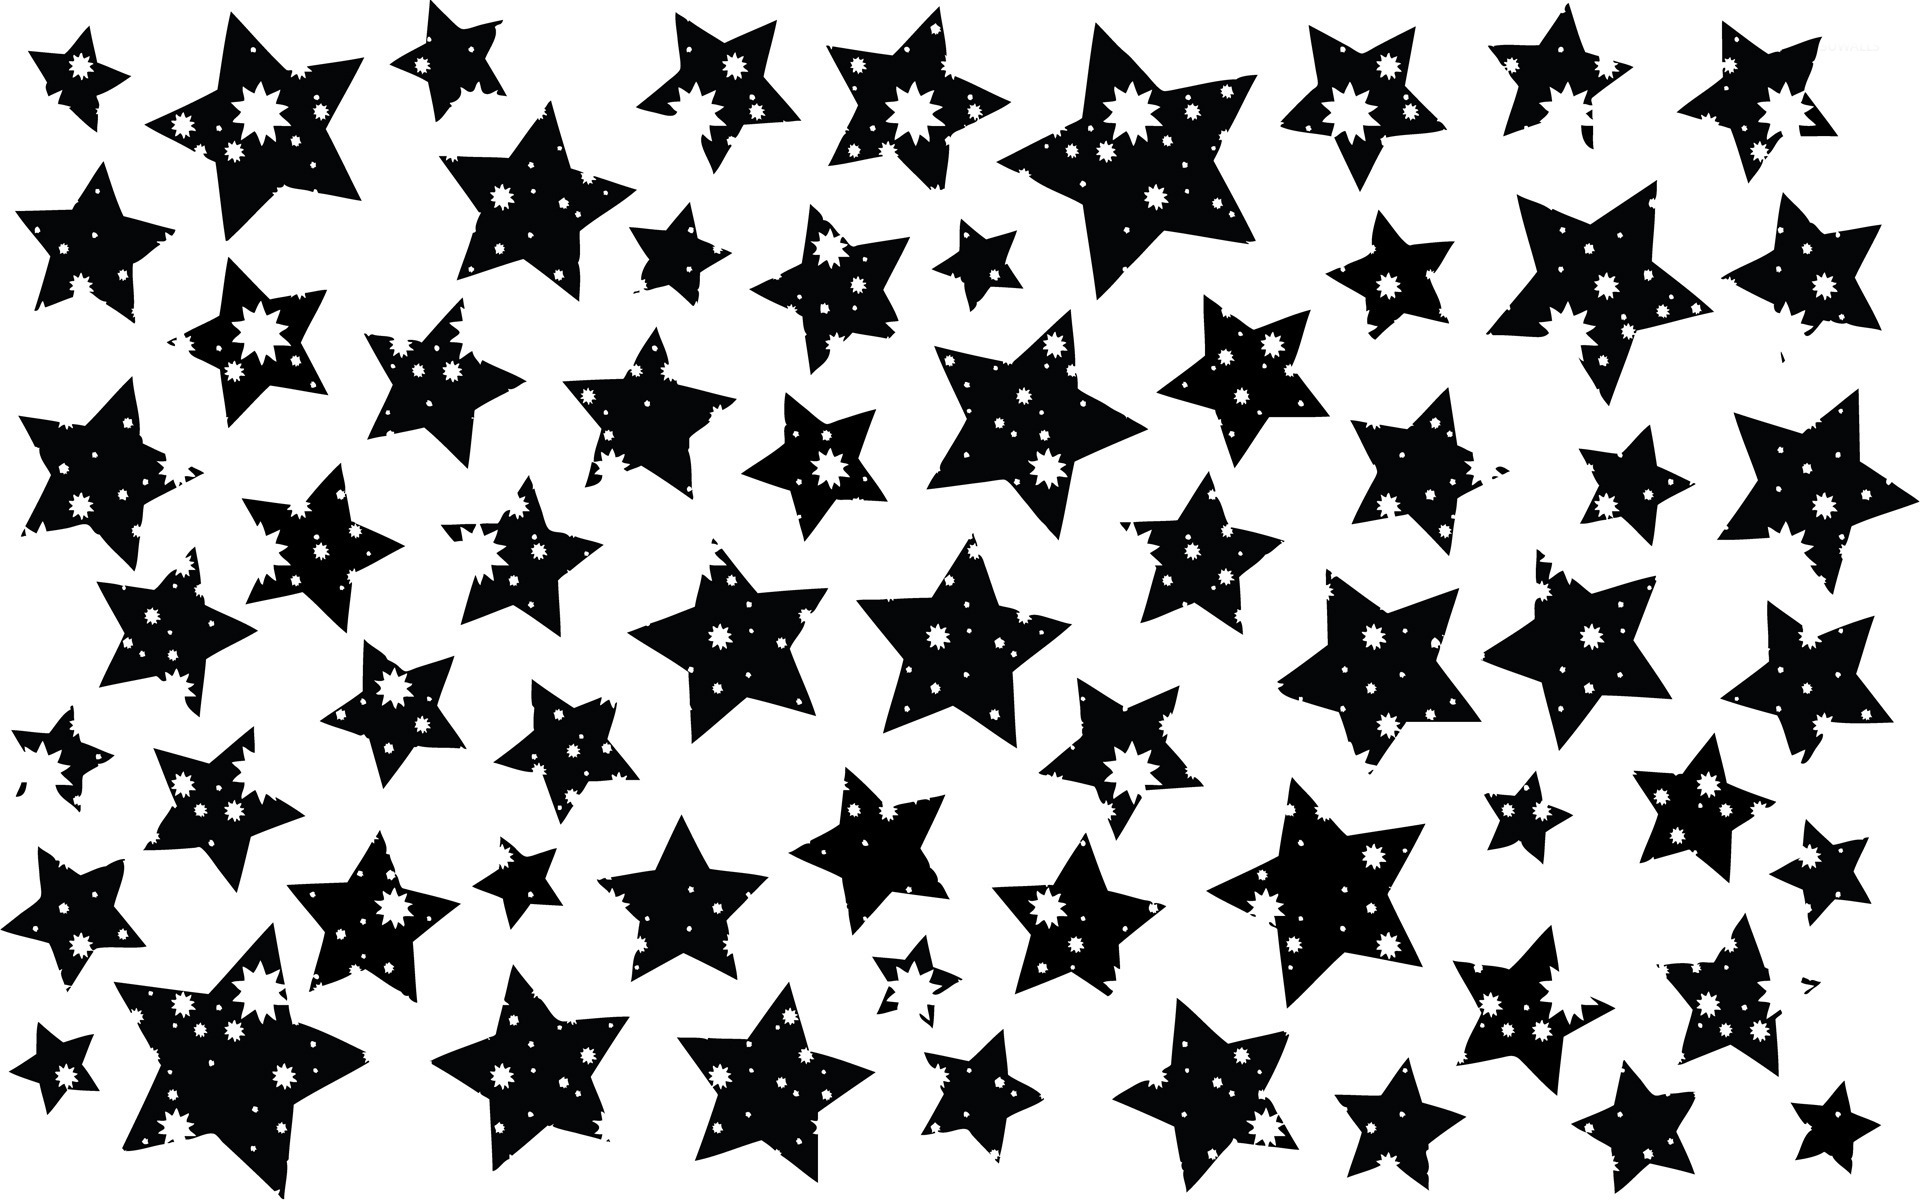 Black and white stars wallpaper - Artistic wallpapers - #16006